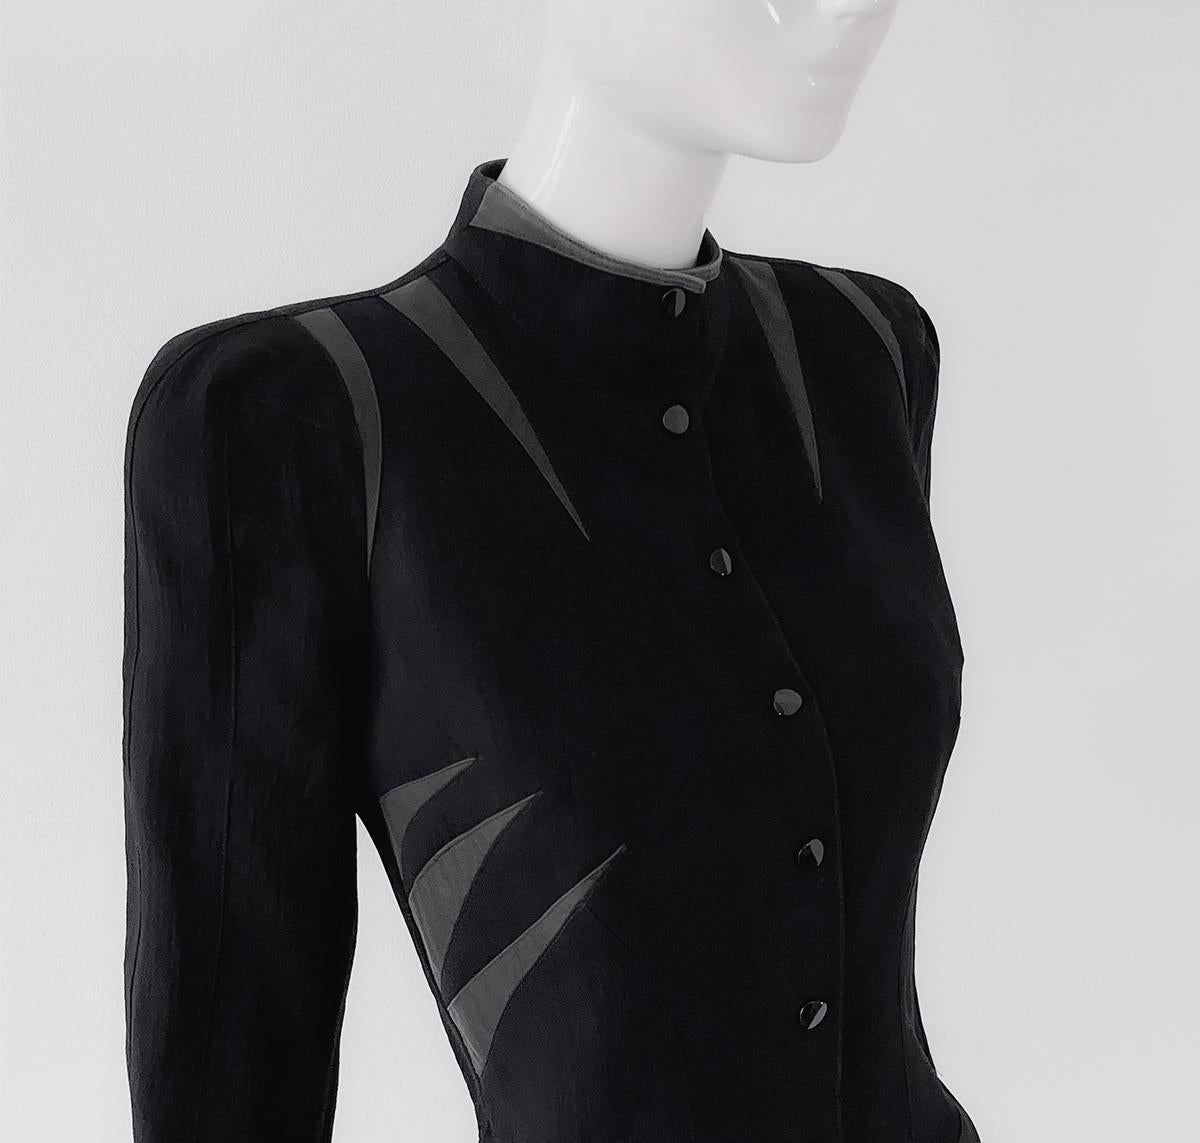 Women's Rare Thierry Mugler SS 1988 Dress Black Iconic Dramatic Collectors Piece  For Sale